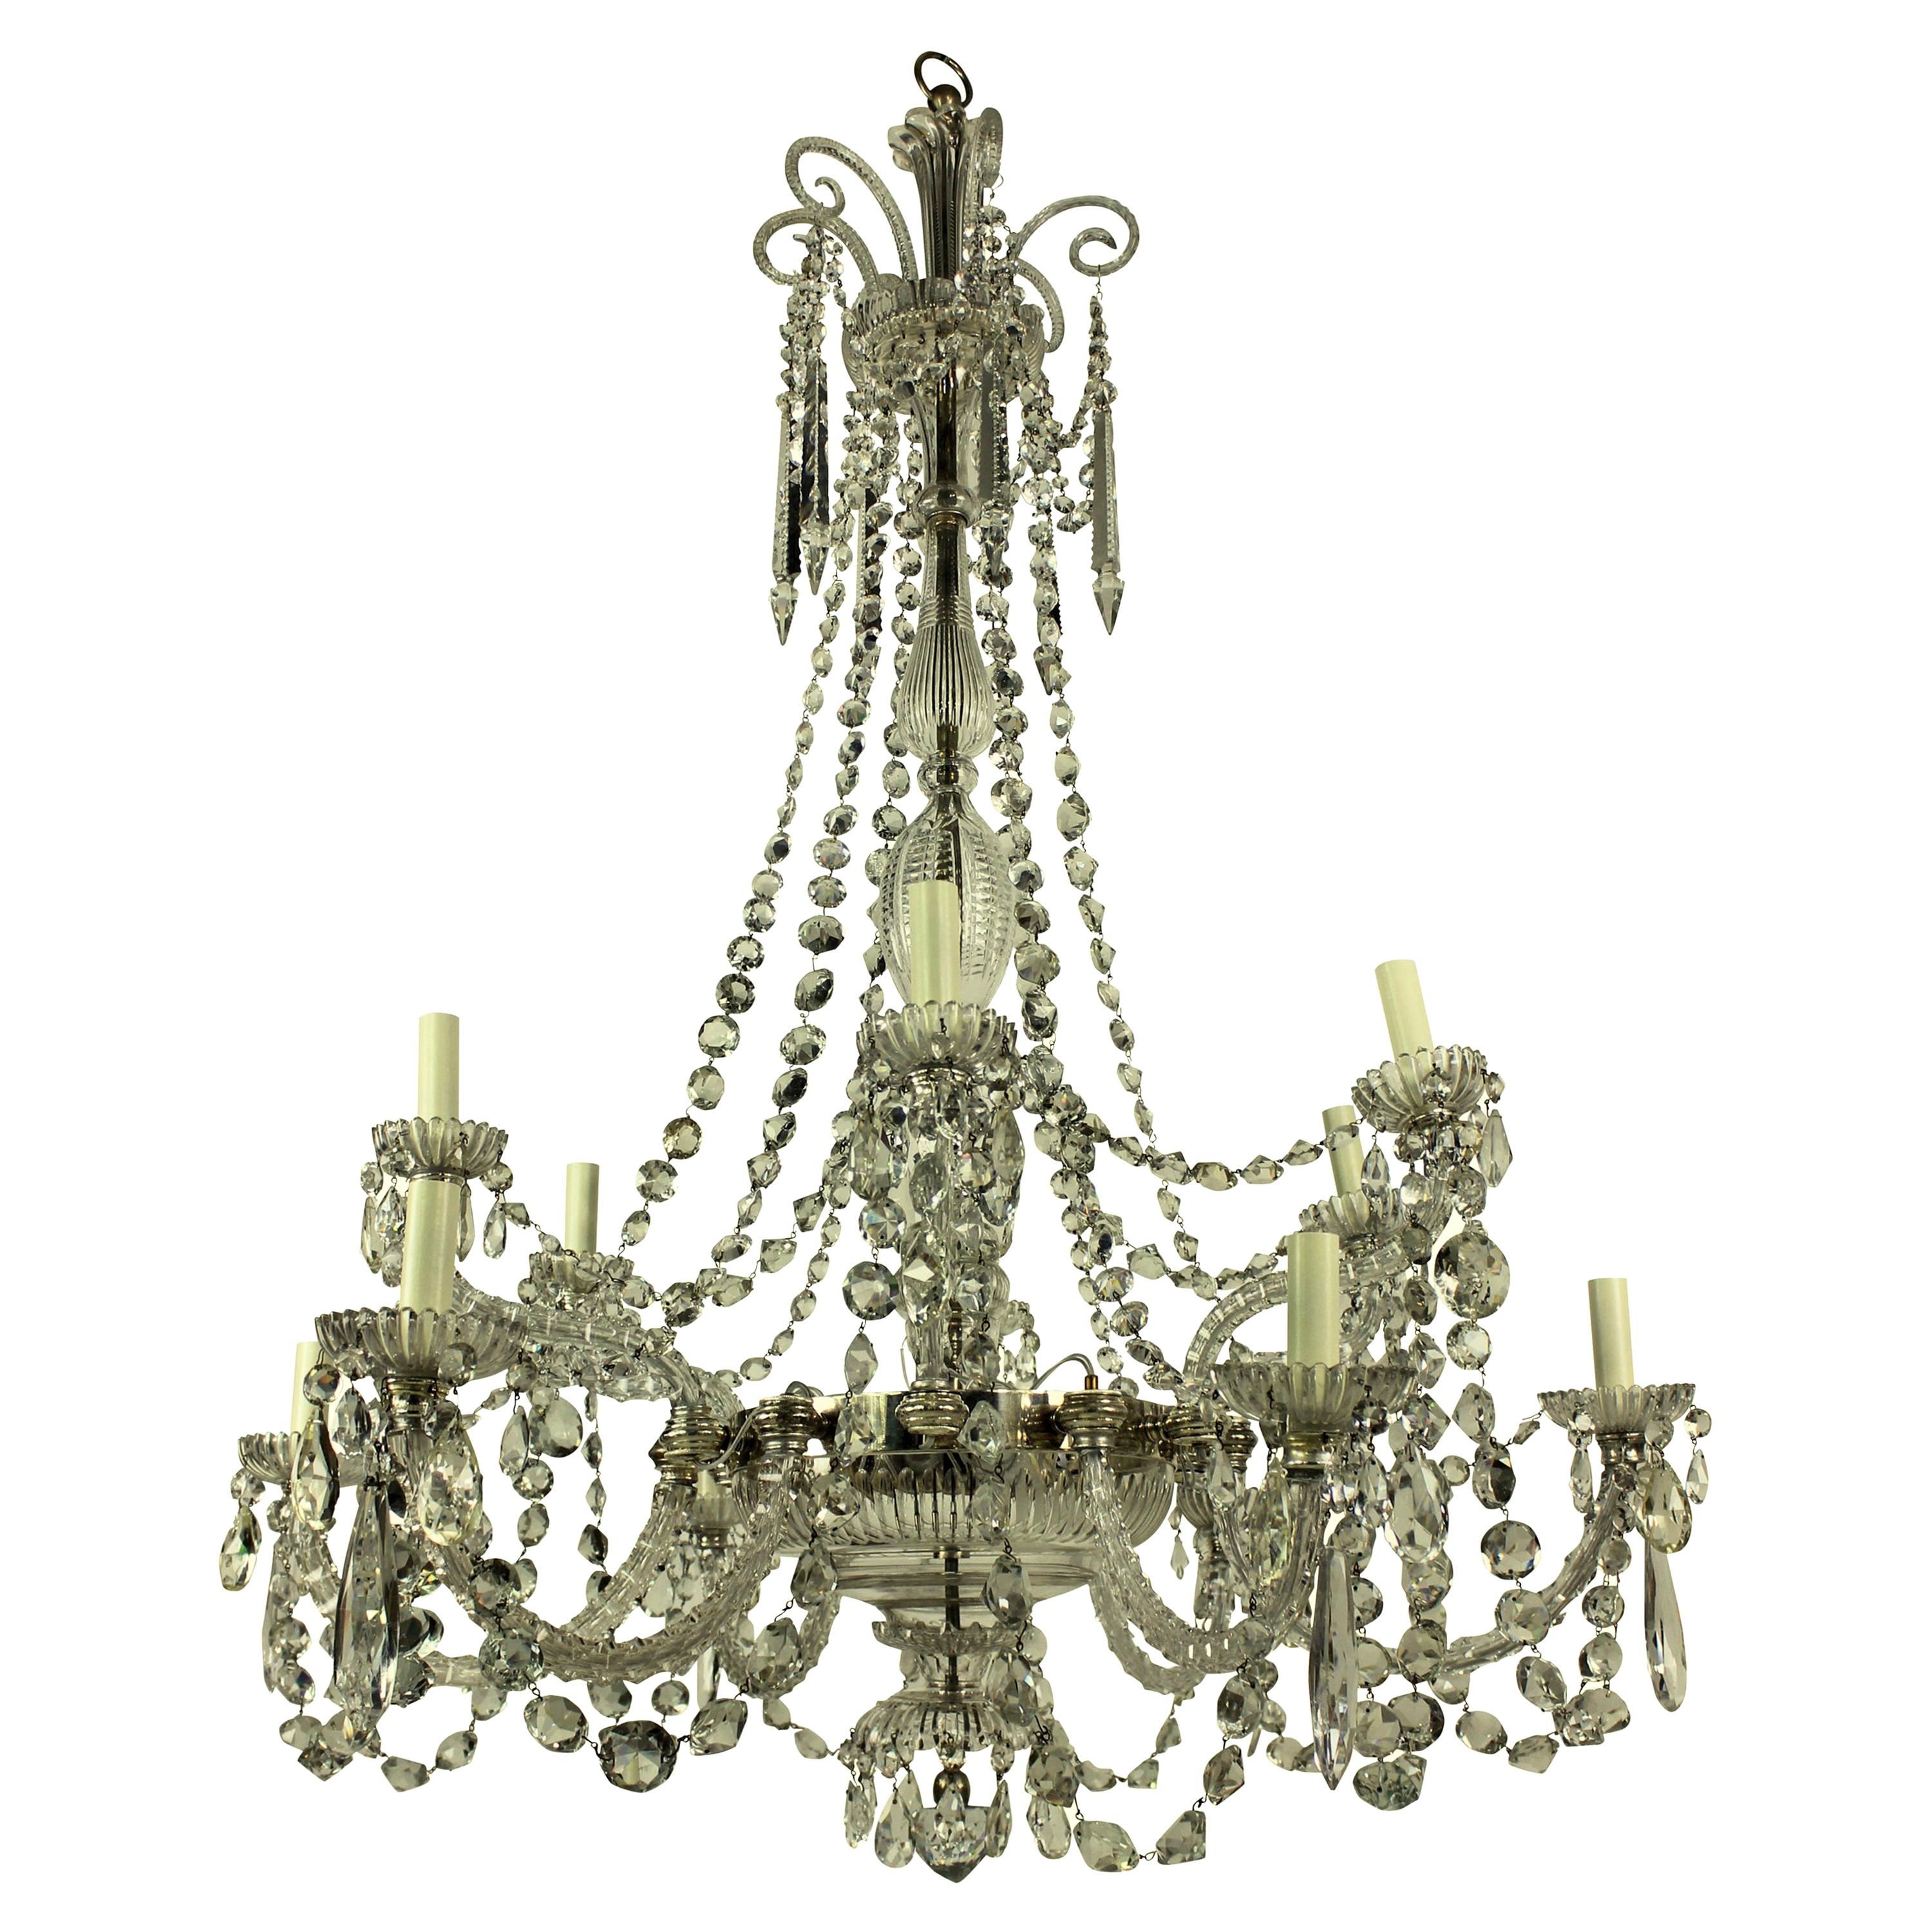 Fine 19th Century English Cut-Glass Chandelier by Perry & Co.